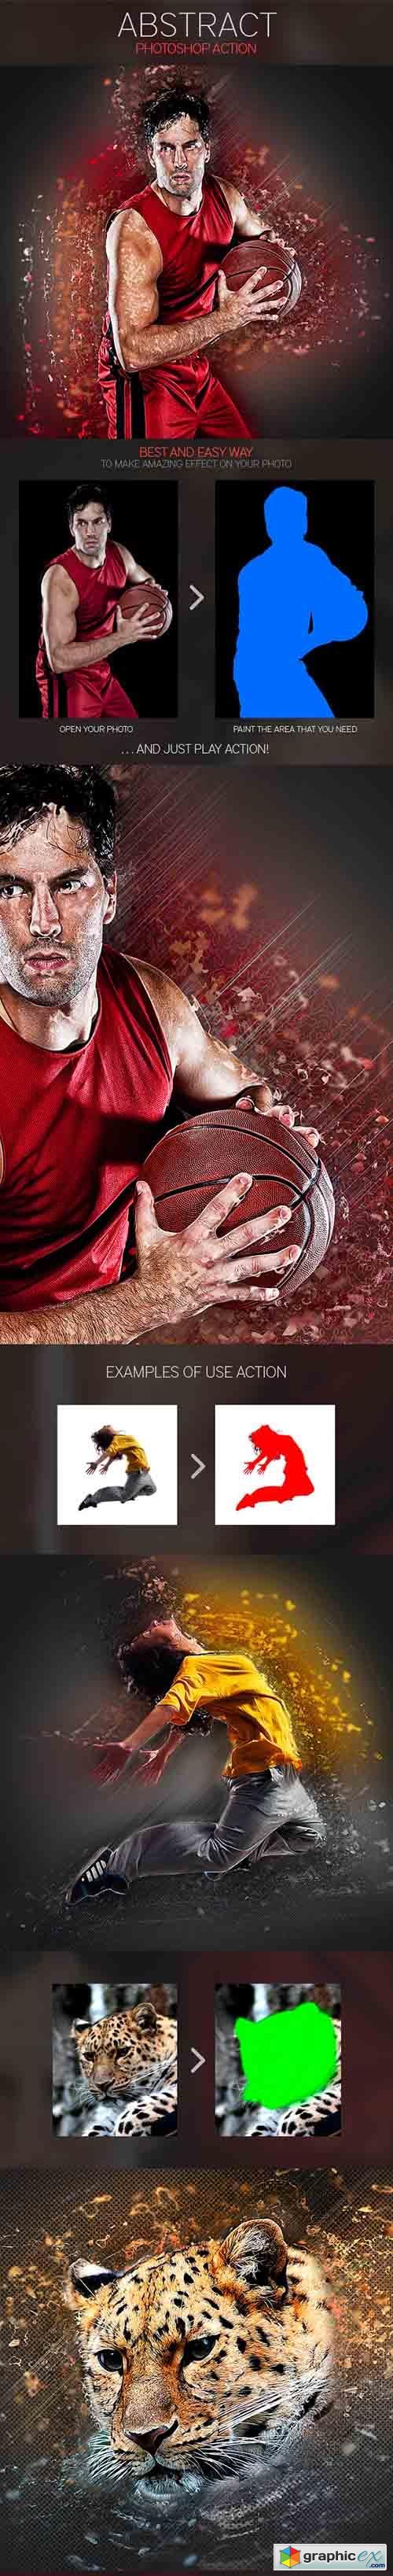 Abstract Photoshop Action 9325380